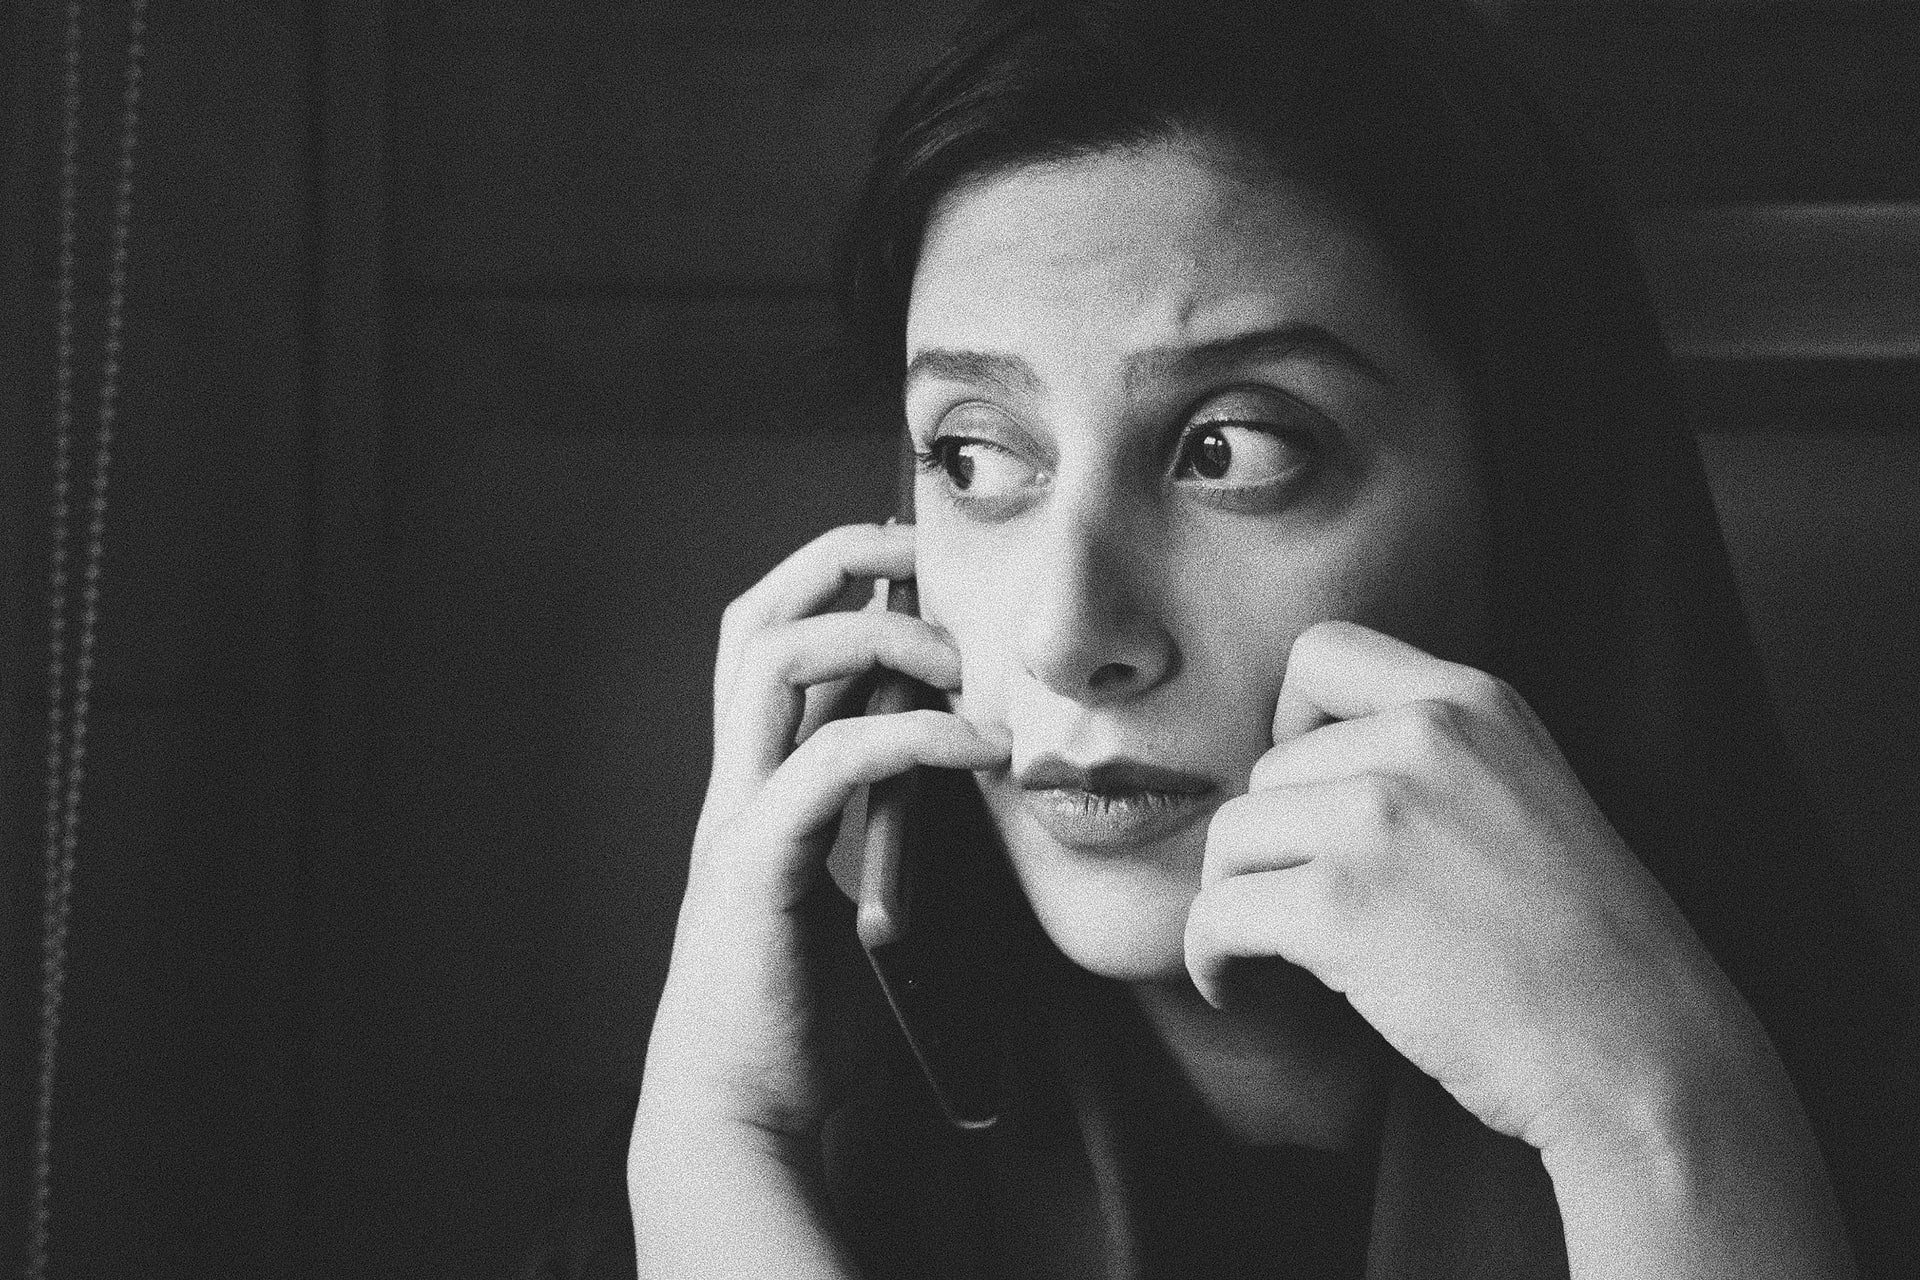 A woman talking on the phone | Source: Unsplash